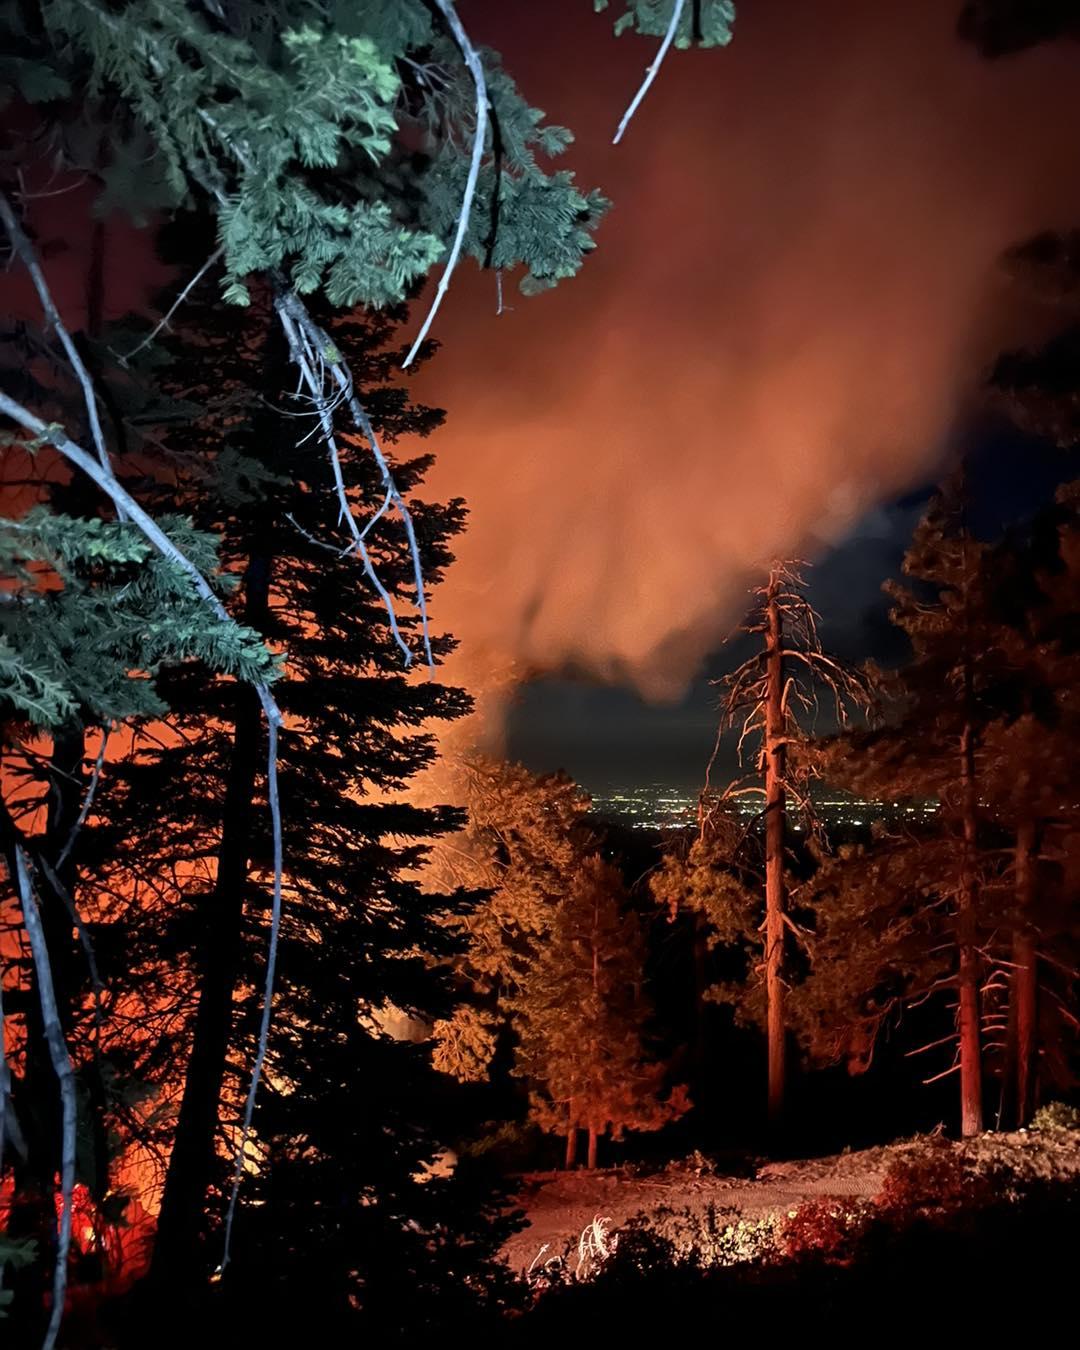 Photo shows fire on the ground in a forest with trees. Smoke is also present.